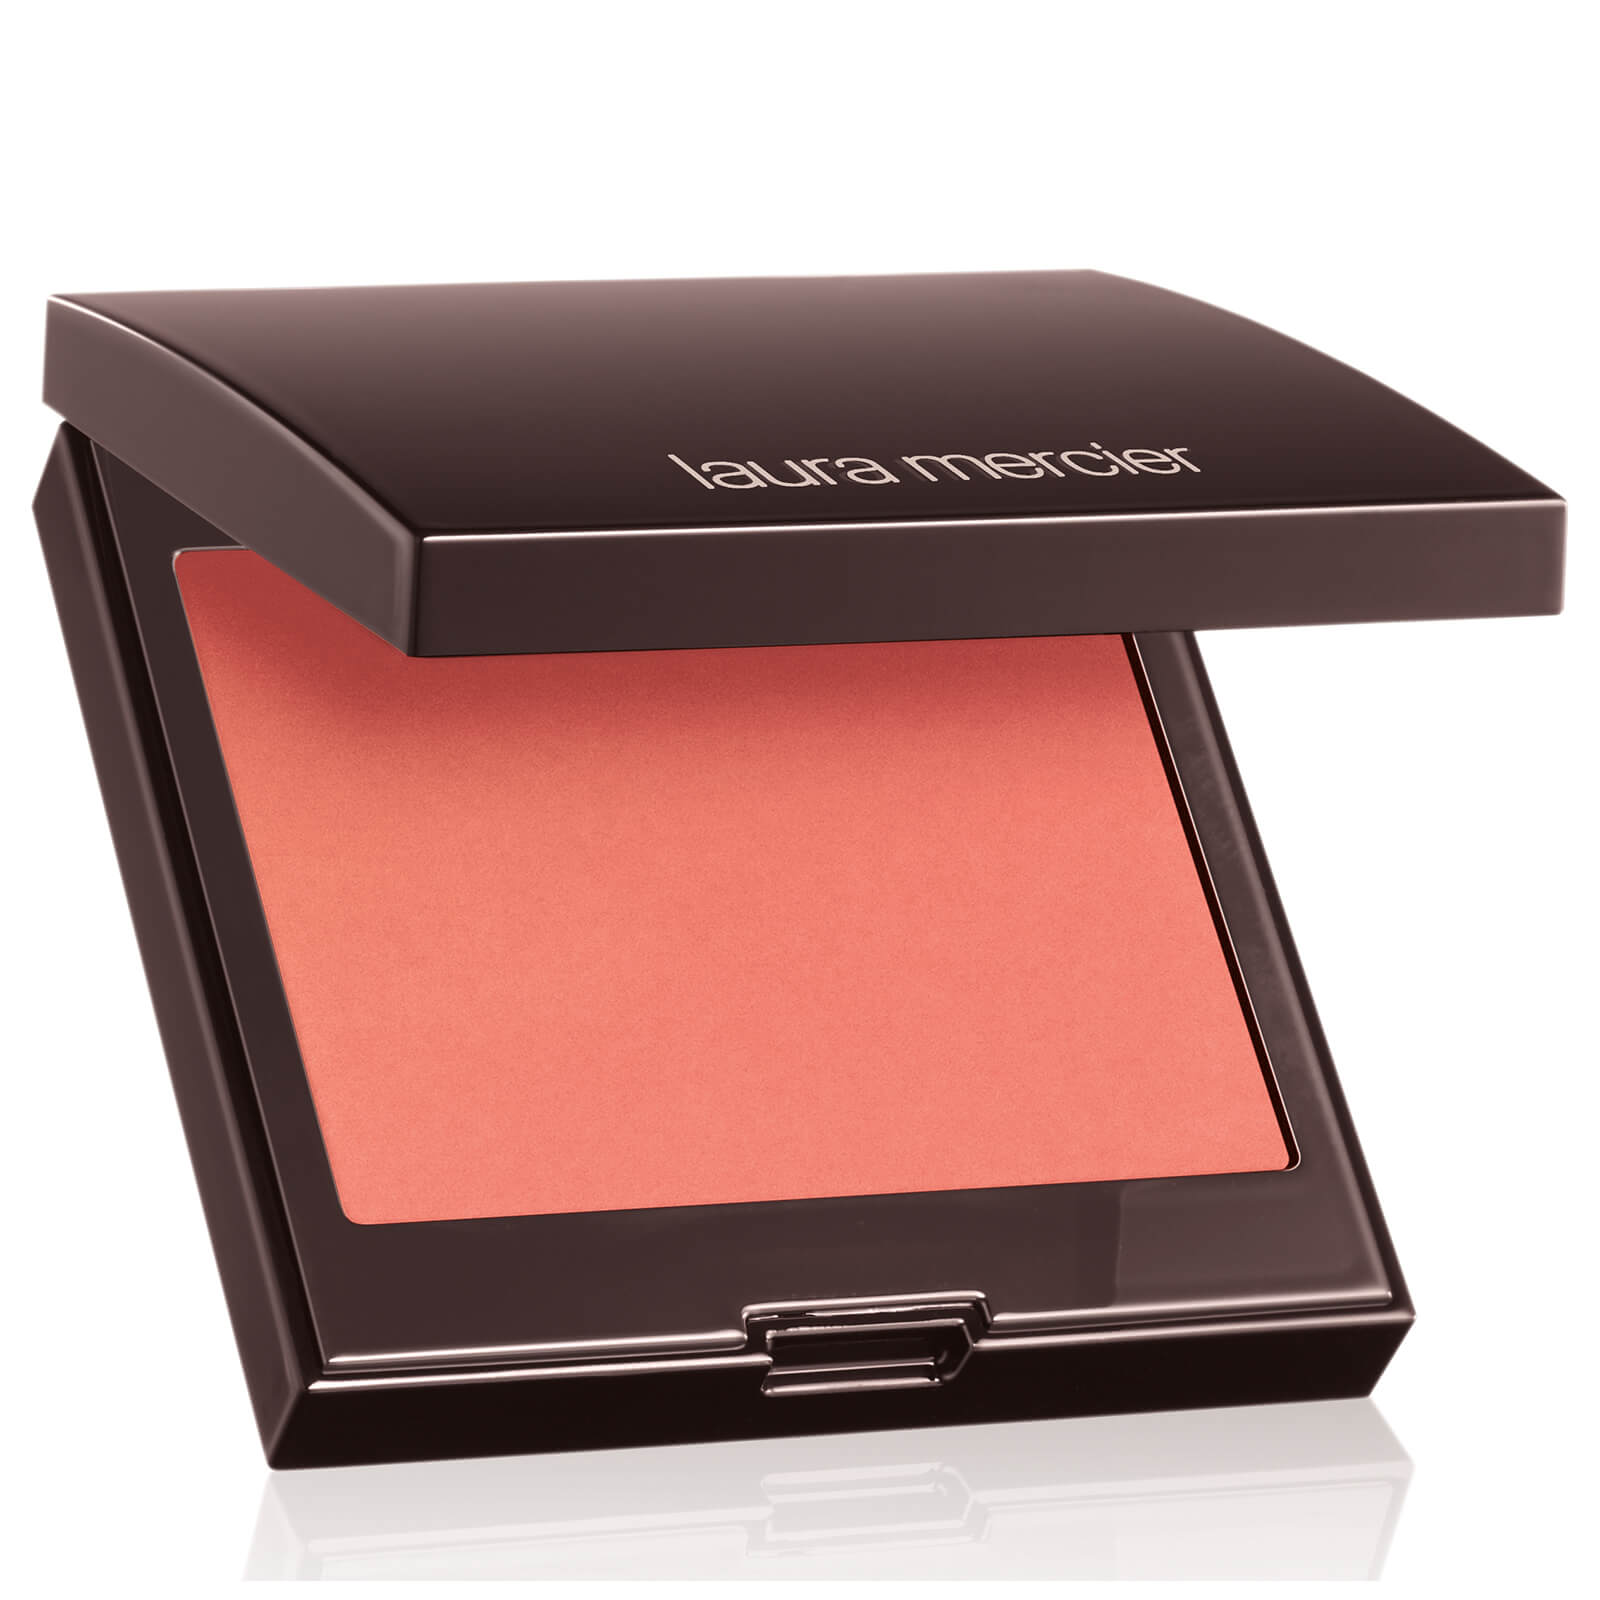 Laura Mercier Blush Colour Infusion Blusher 6g (various Shades) - Peach In Pink